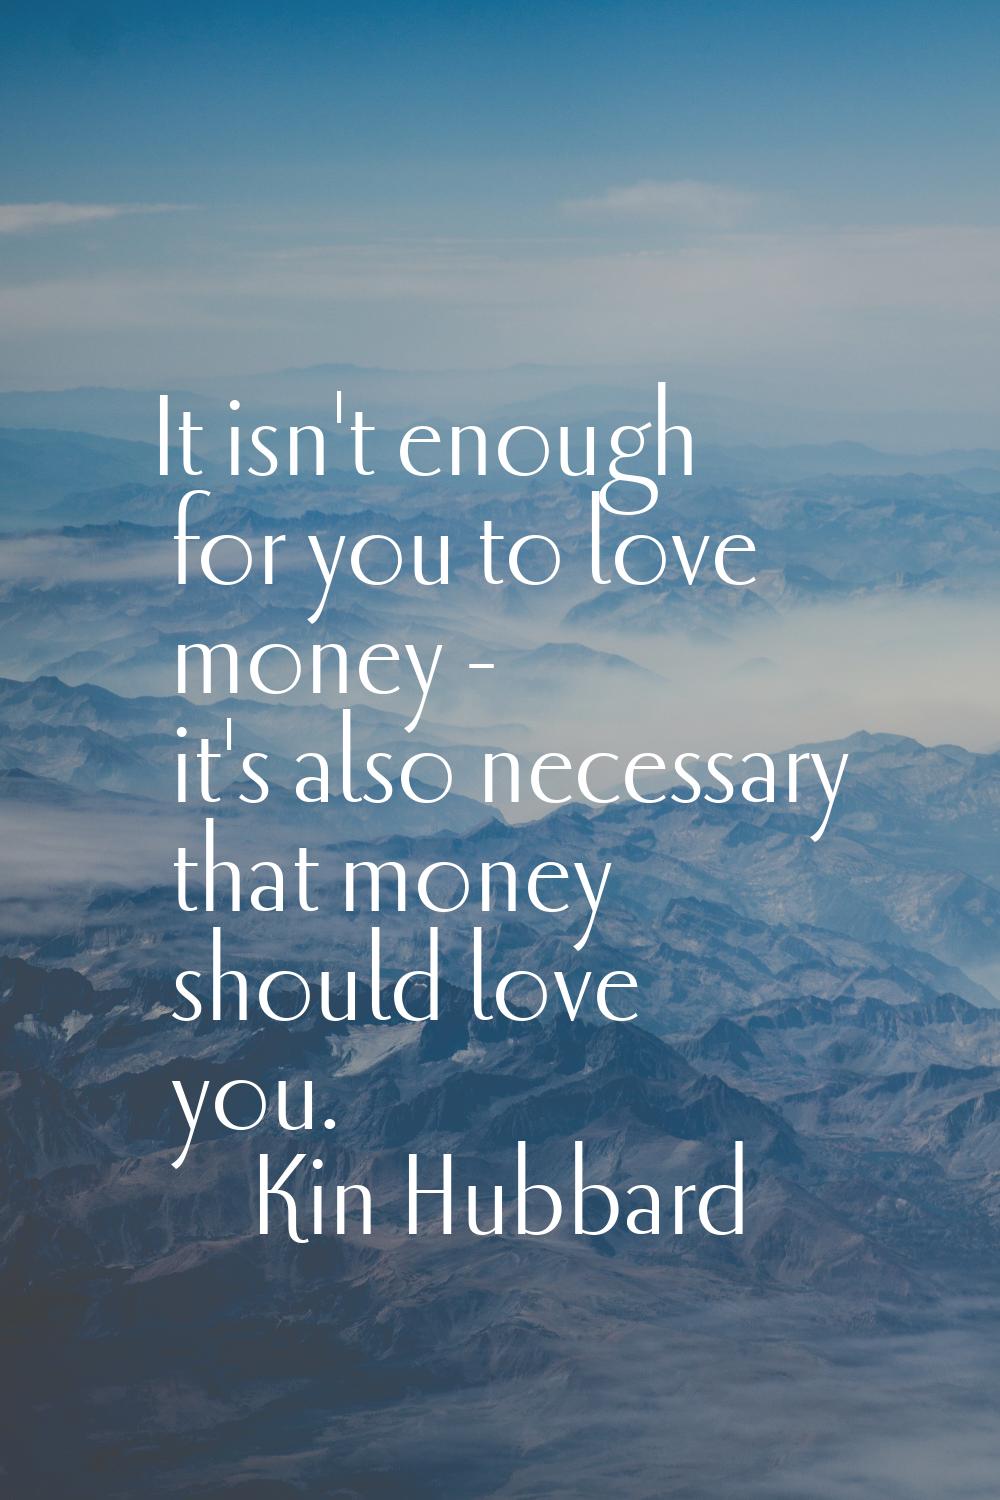 It isn't enough for you to love money - it's also necessary that money should love you.